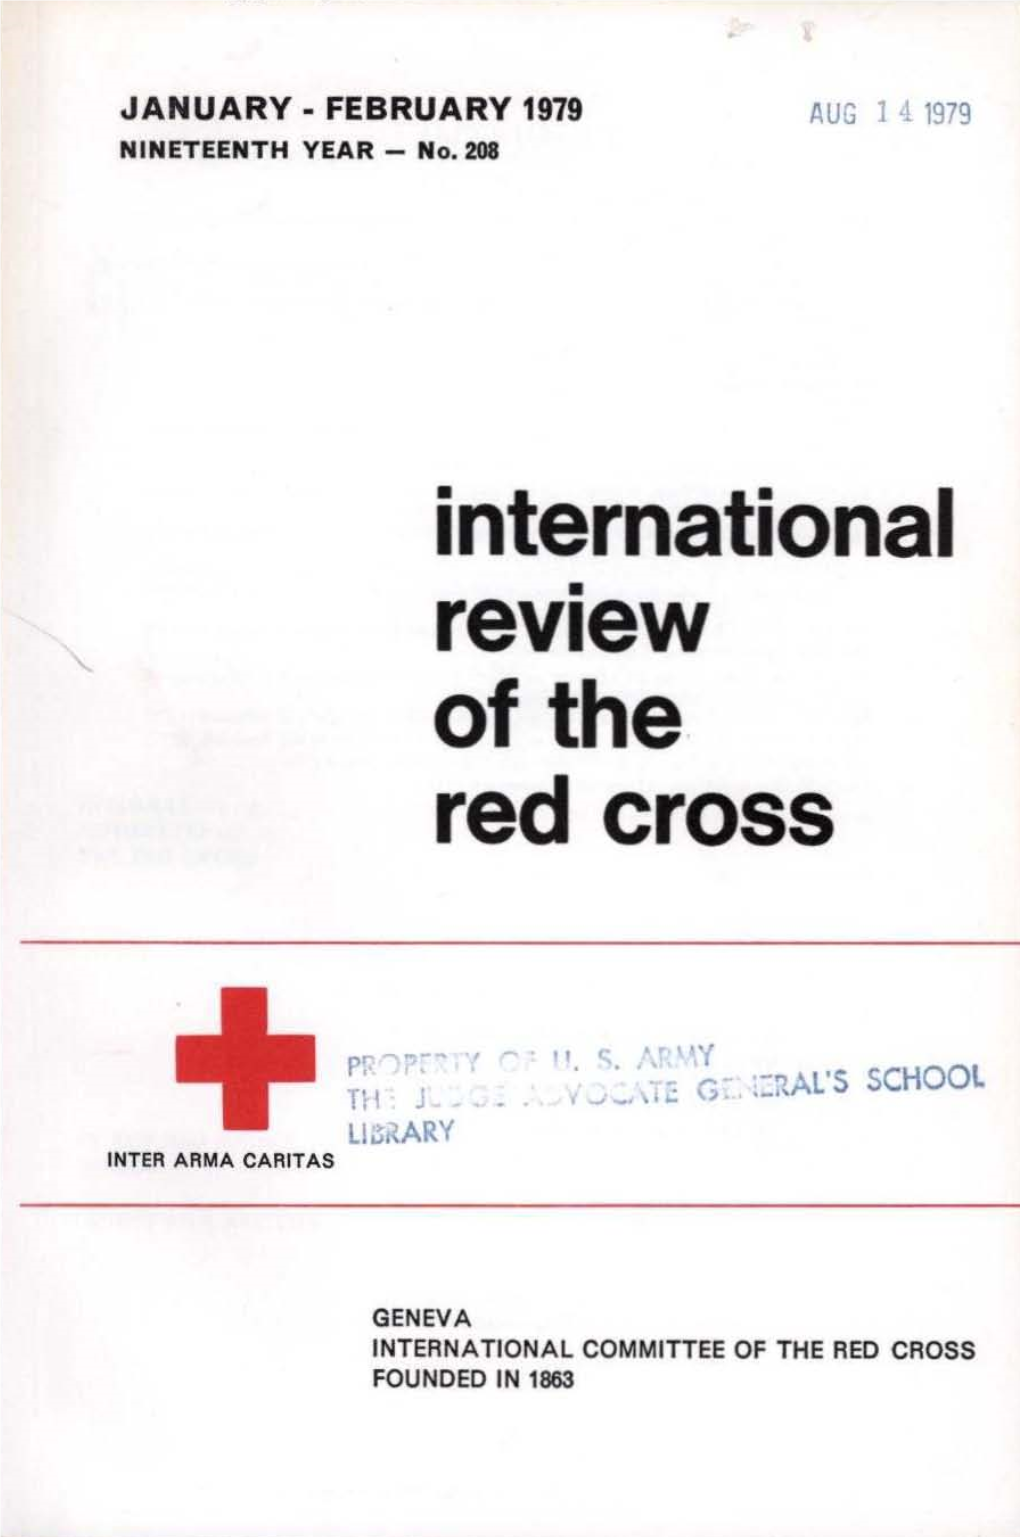 International Review of the Red Cross, January-February 1979